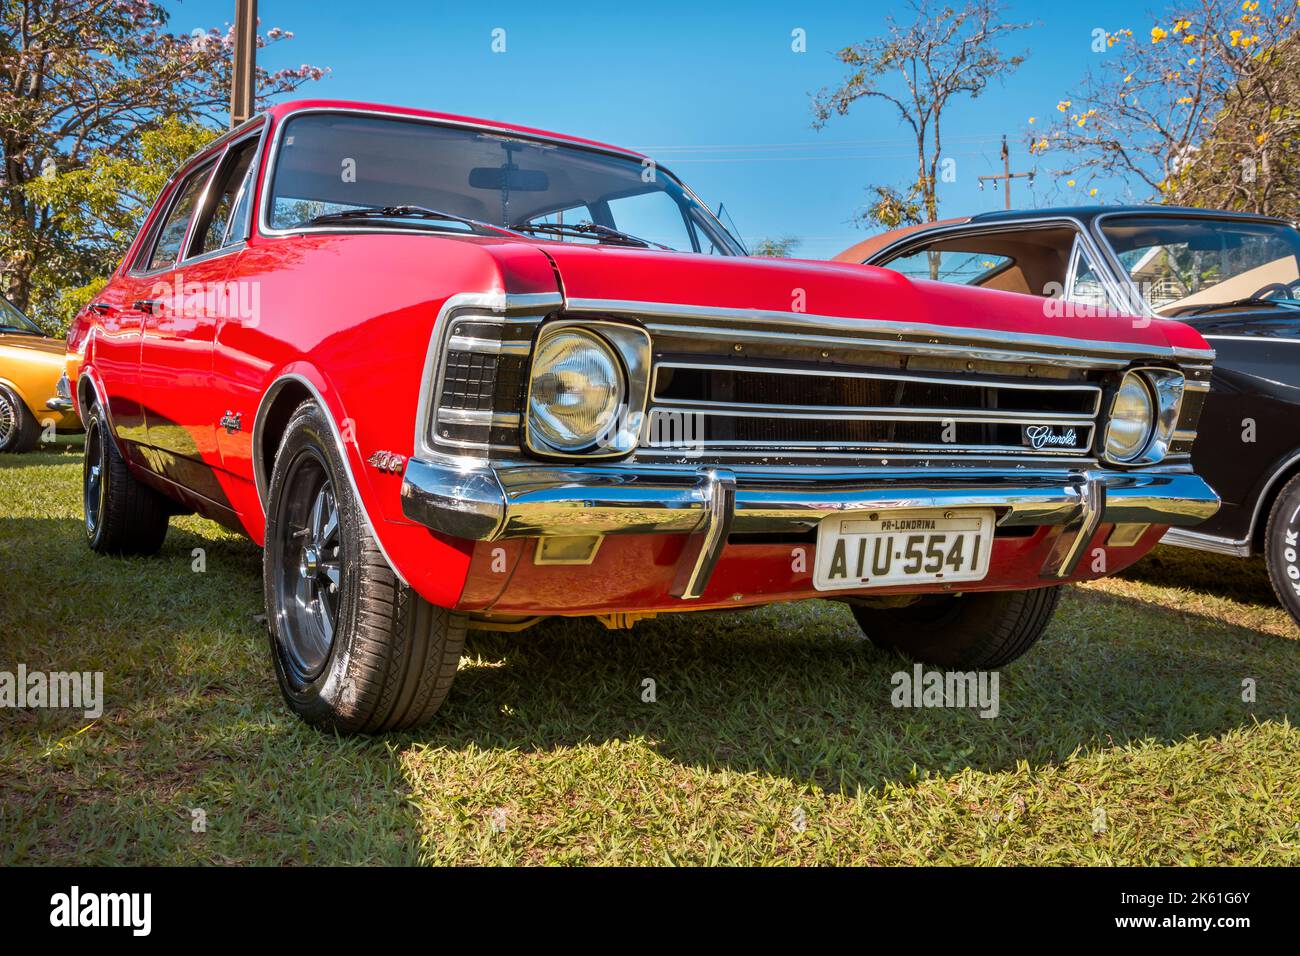 Vehicle Chevrolet Opala model 4100, year 1972, on display at vintage car show. Stock Photo